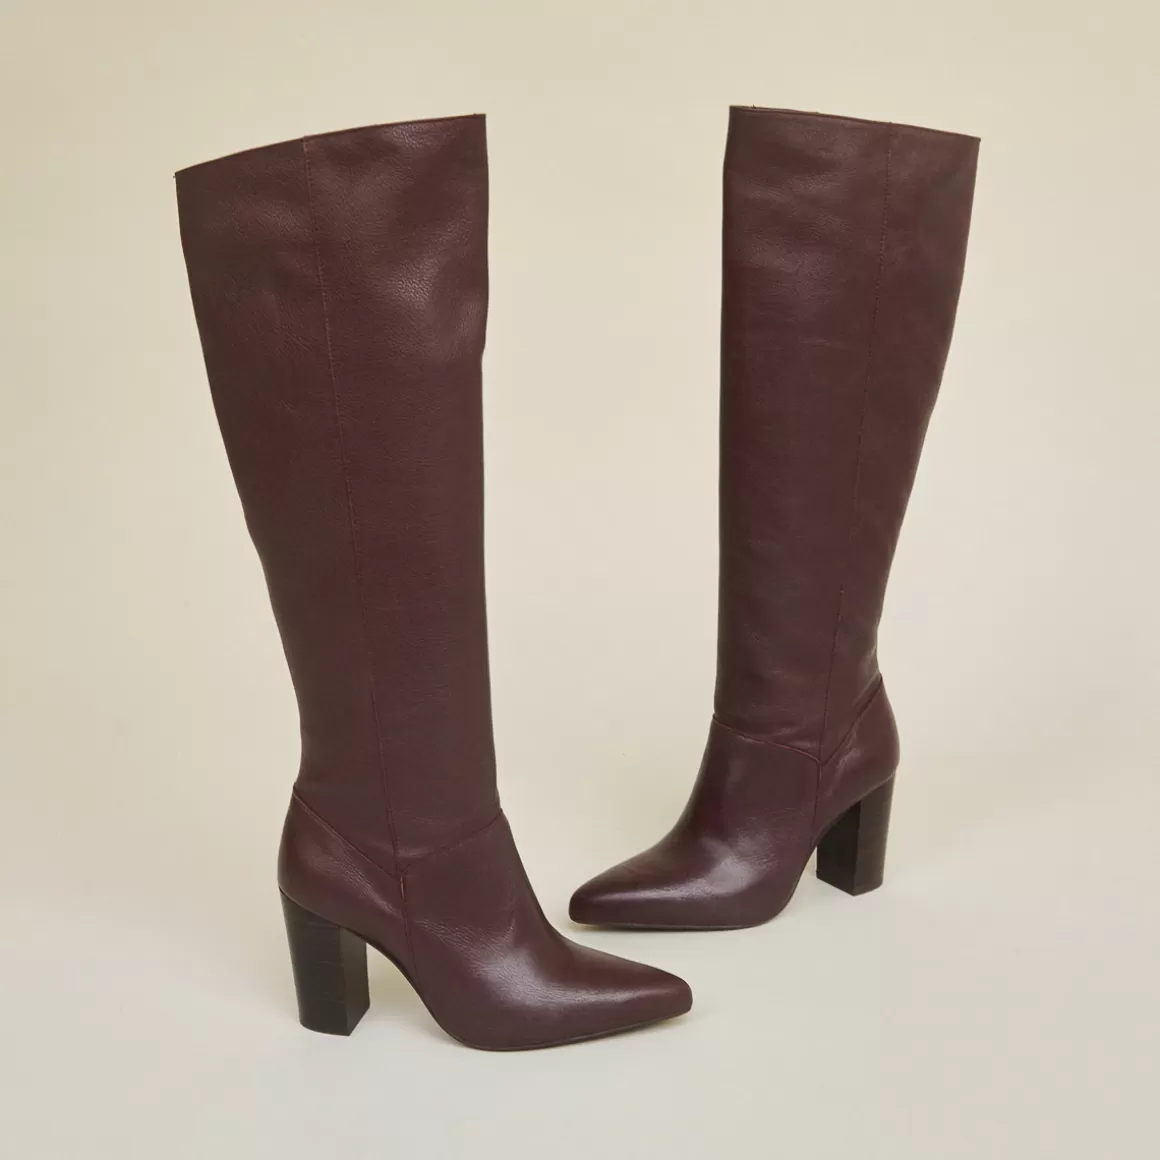 High boots with heels and pointed toes<Jonak New